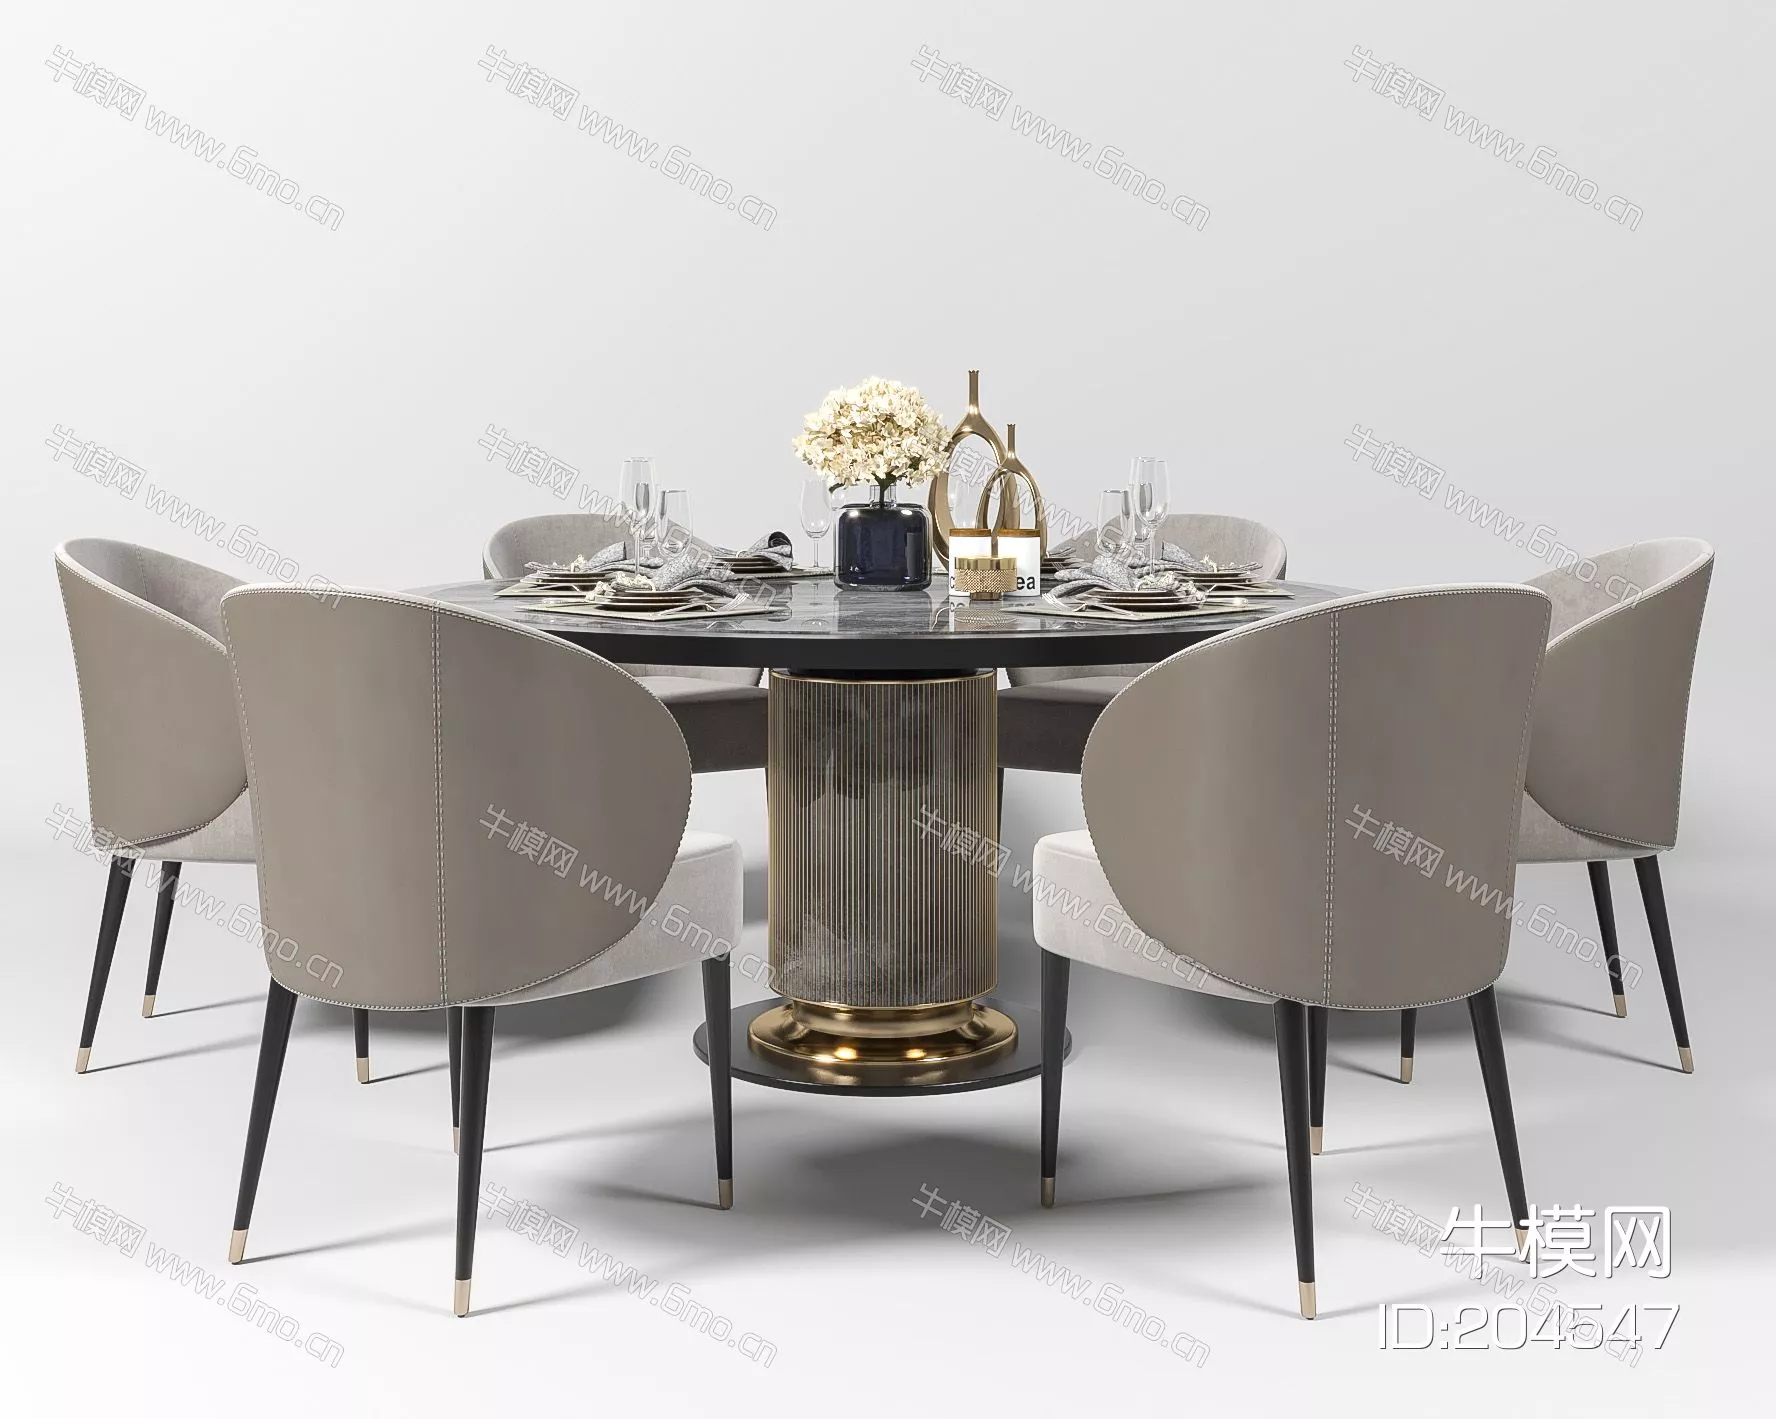 CHINESE DINING TABLE SET - SKETCHUP 3D MODEL - ENSCAPE - 204547